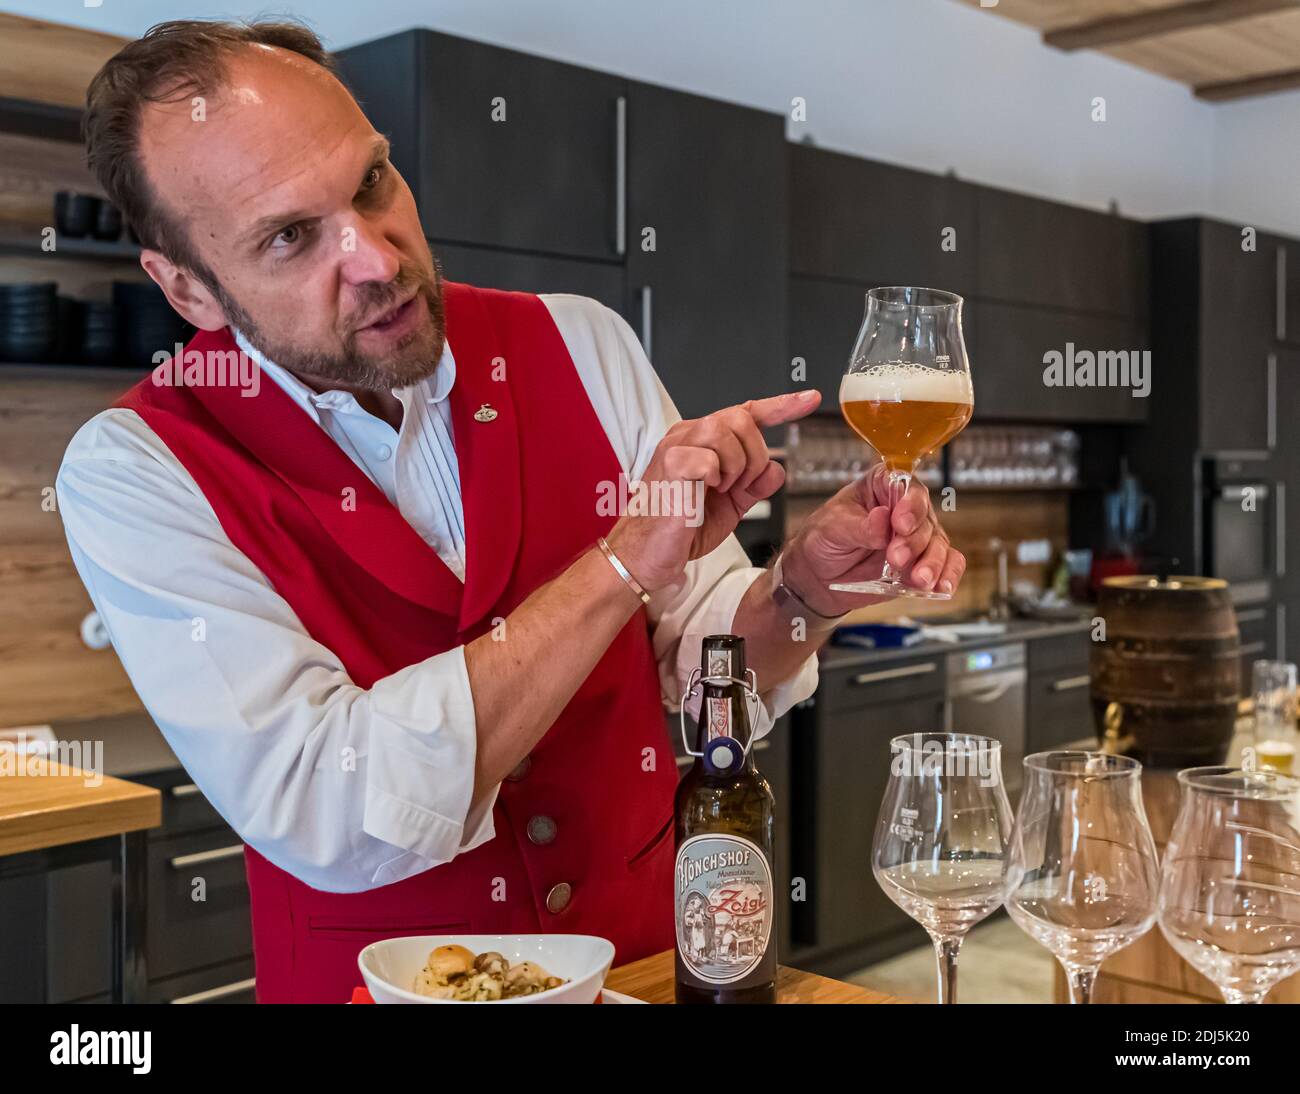 Beer-Tasting with Beer-Sommelier in Kemnath-Waldeck, Germany. A beer sommelier is always a storyteller and combines his beer knowledge with anecdotes about brewing and drinking beer. Stock Photo